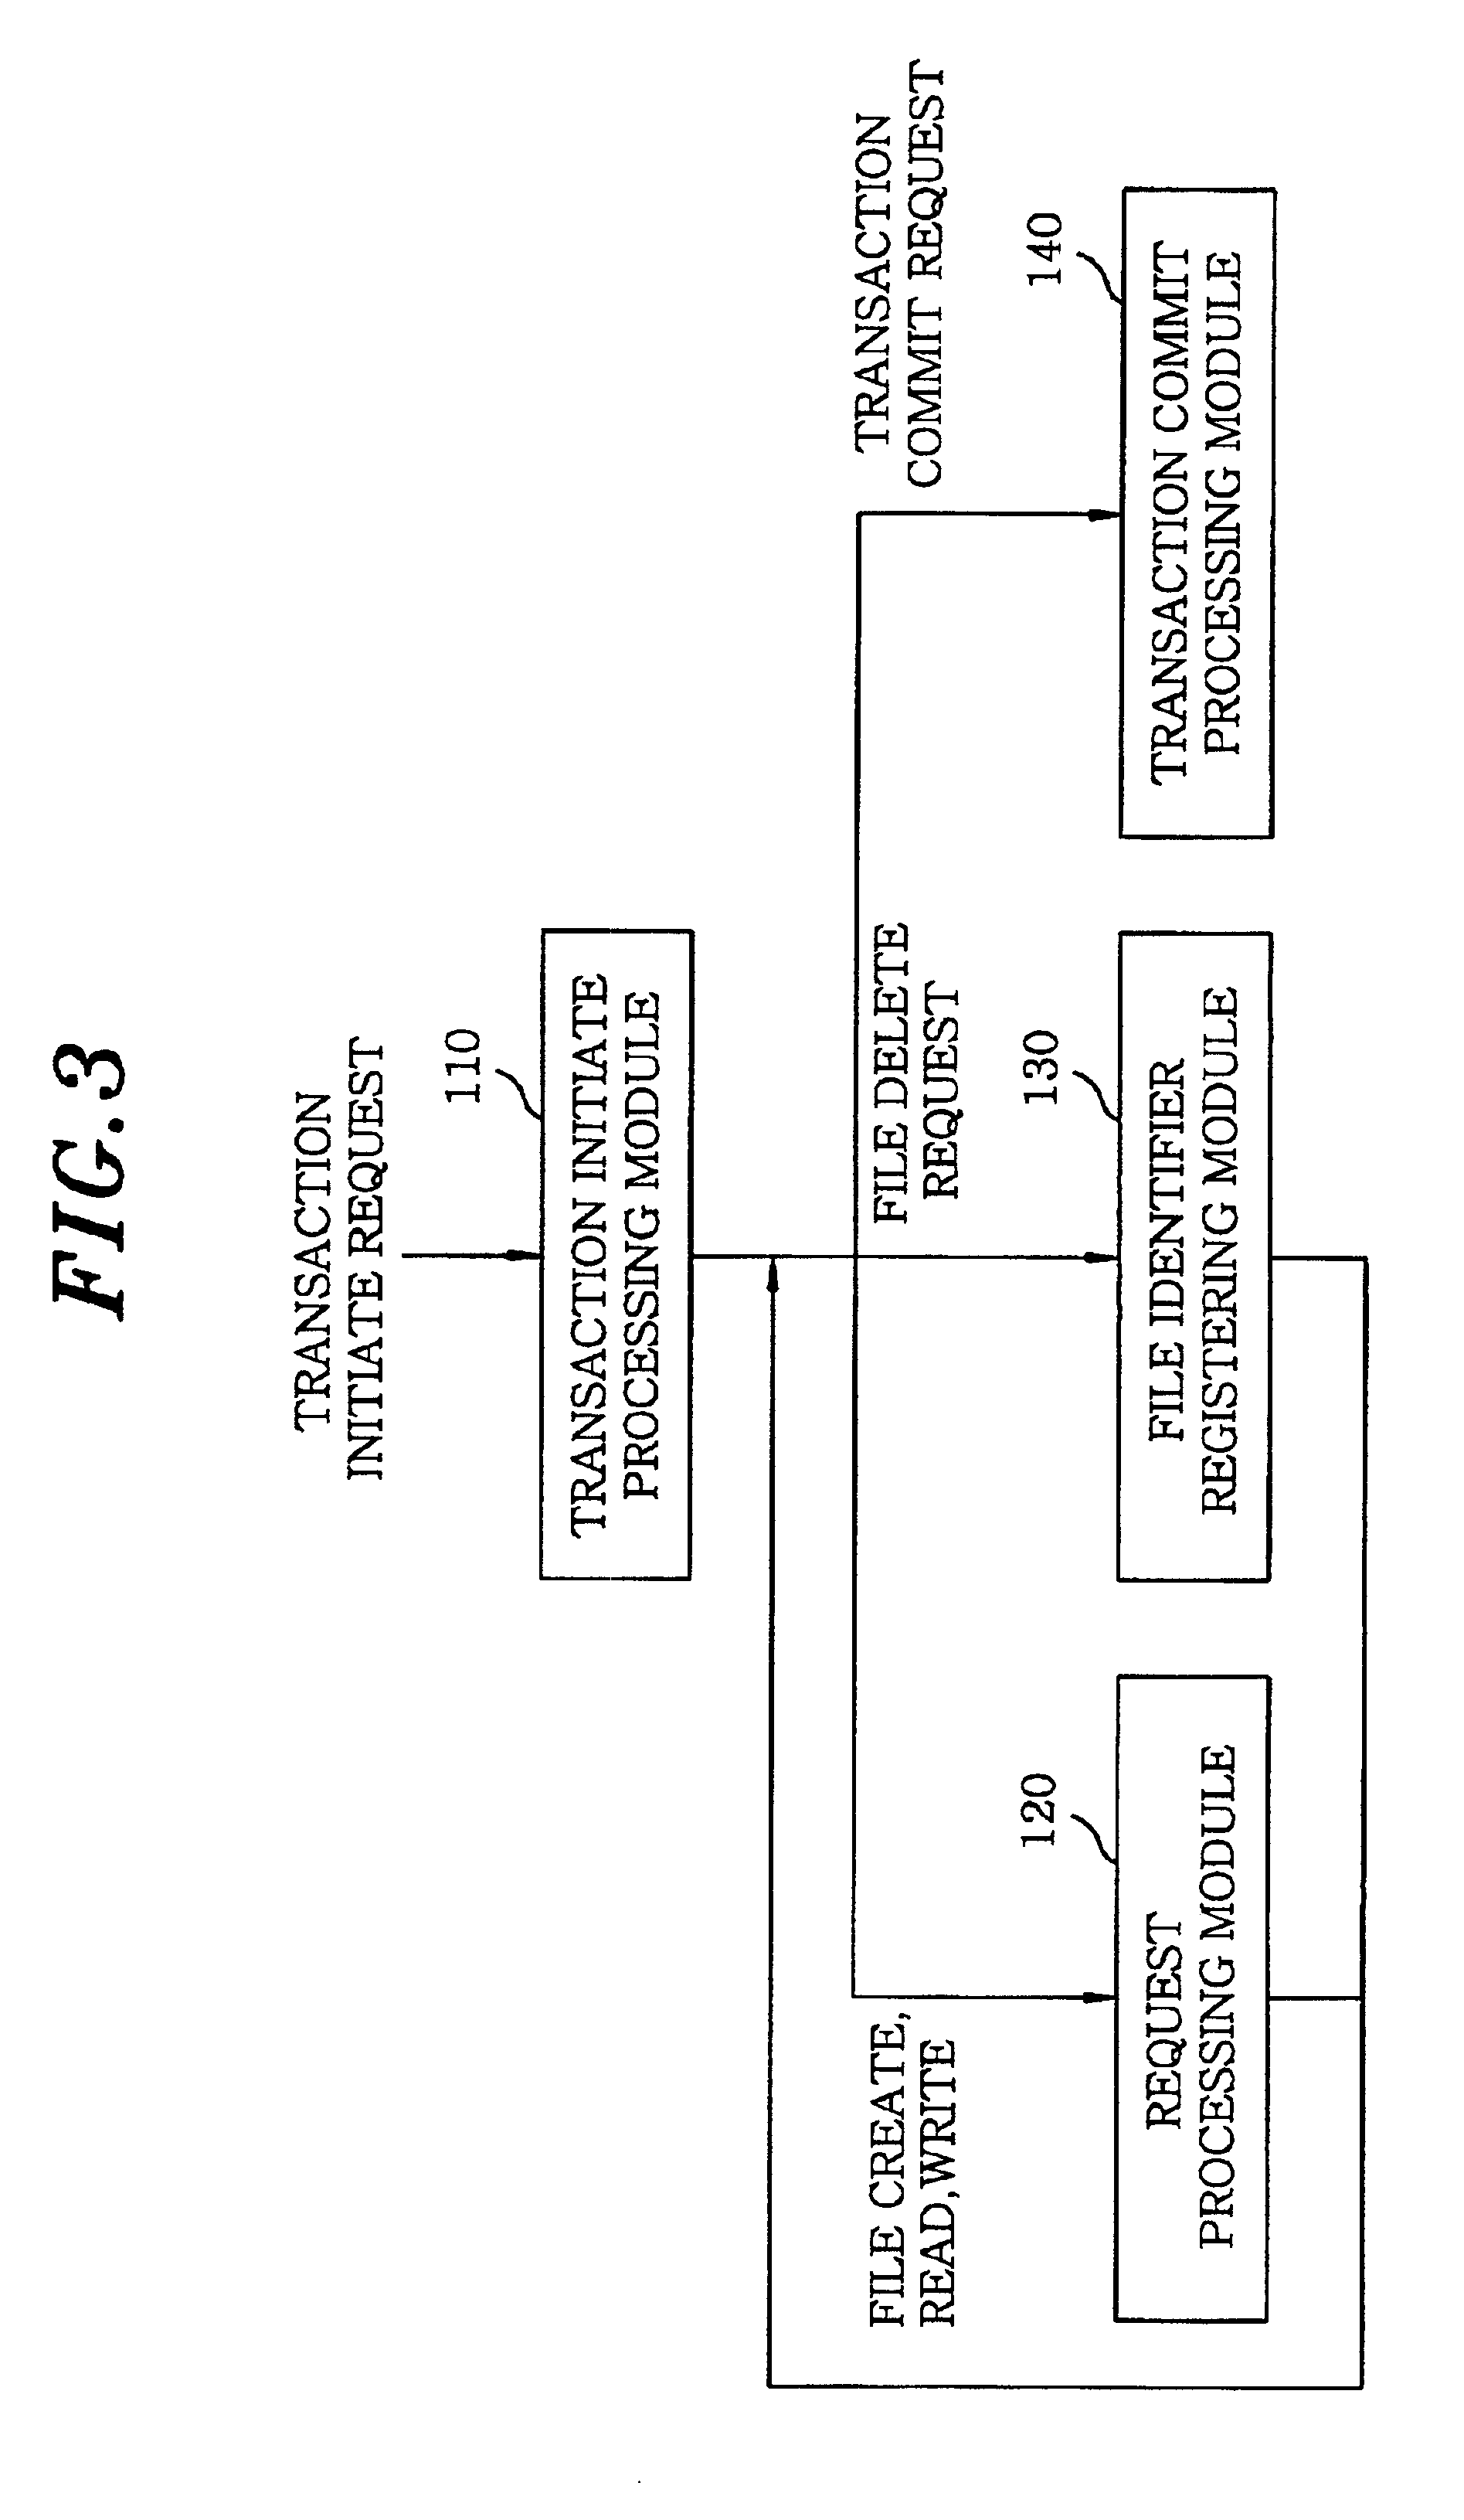 Method for file deletion and recovery against system failures in database management system